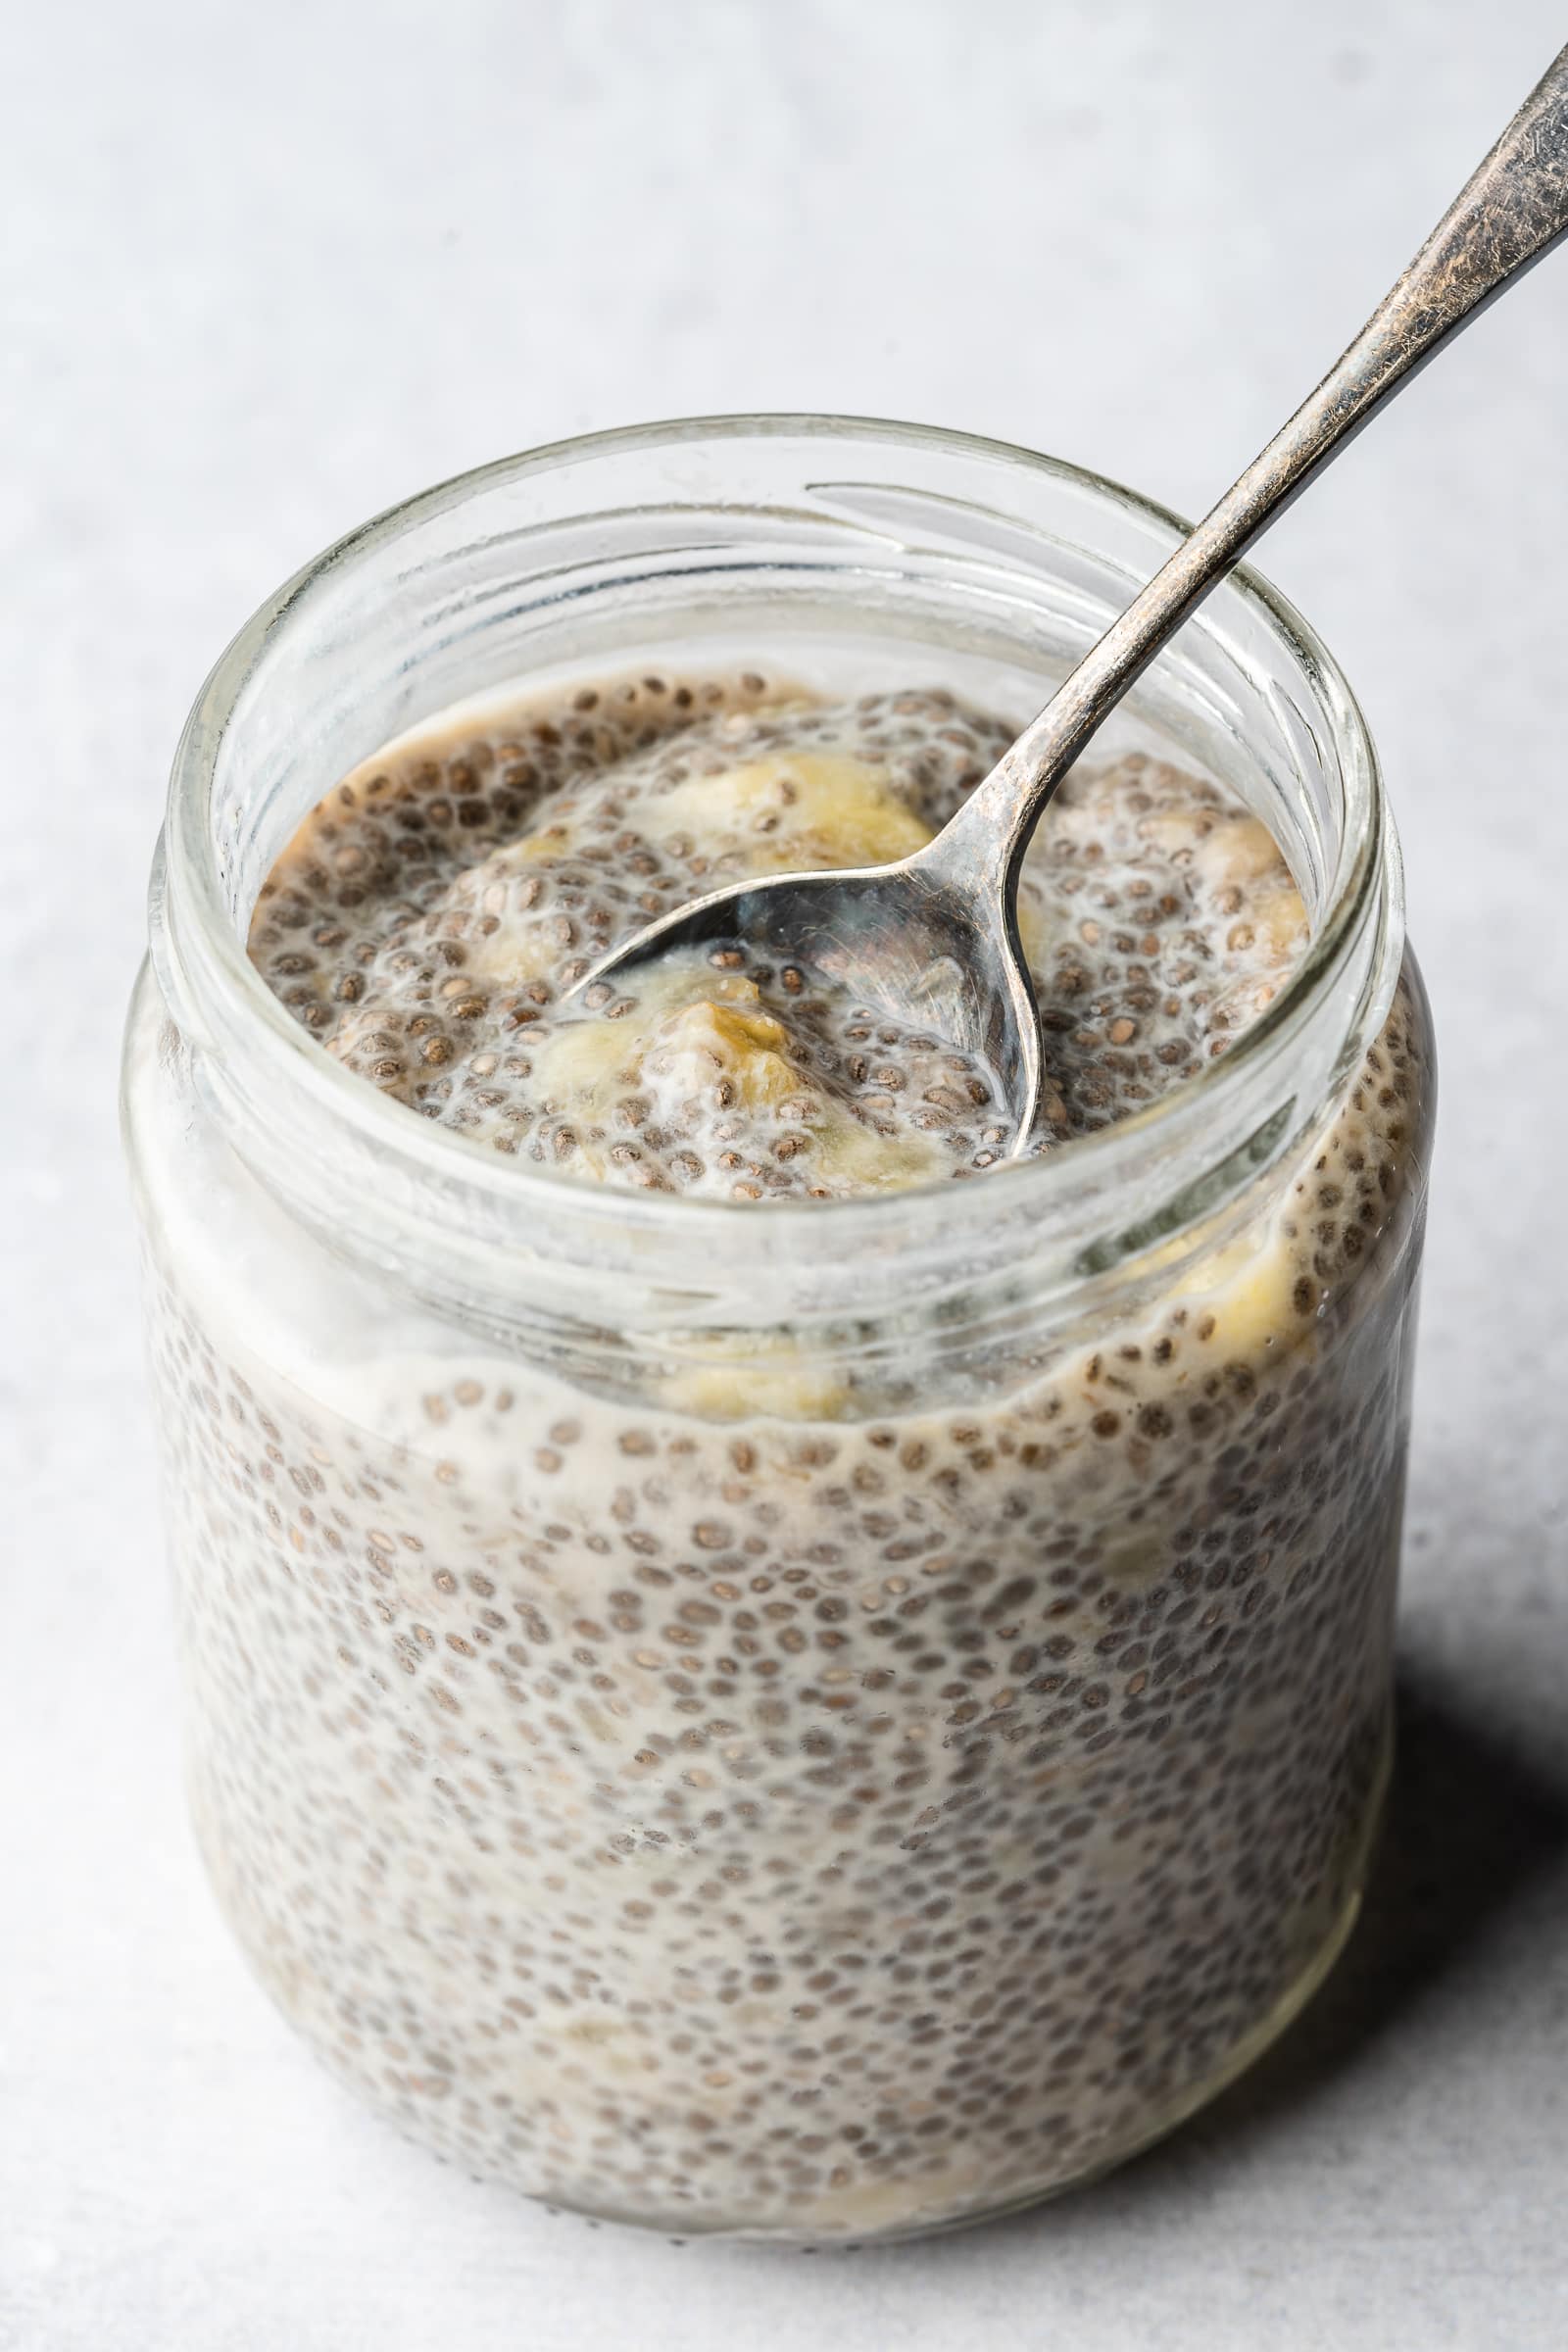 Banana chia pudding after being soaked.